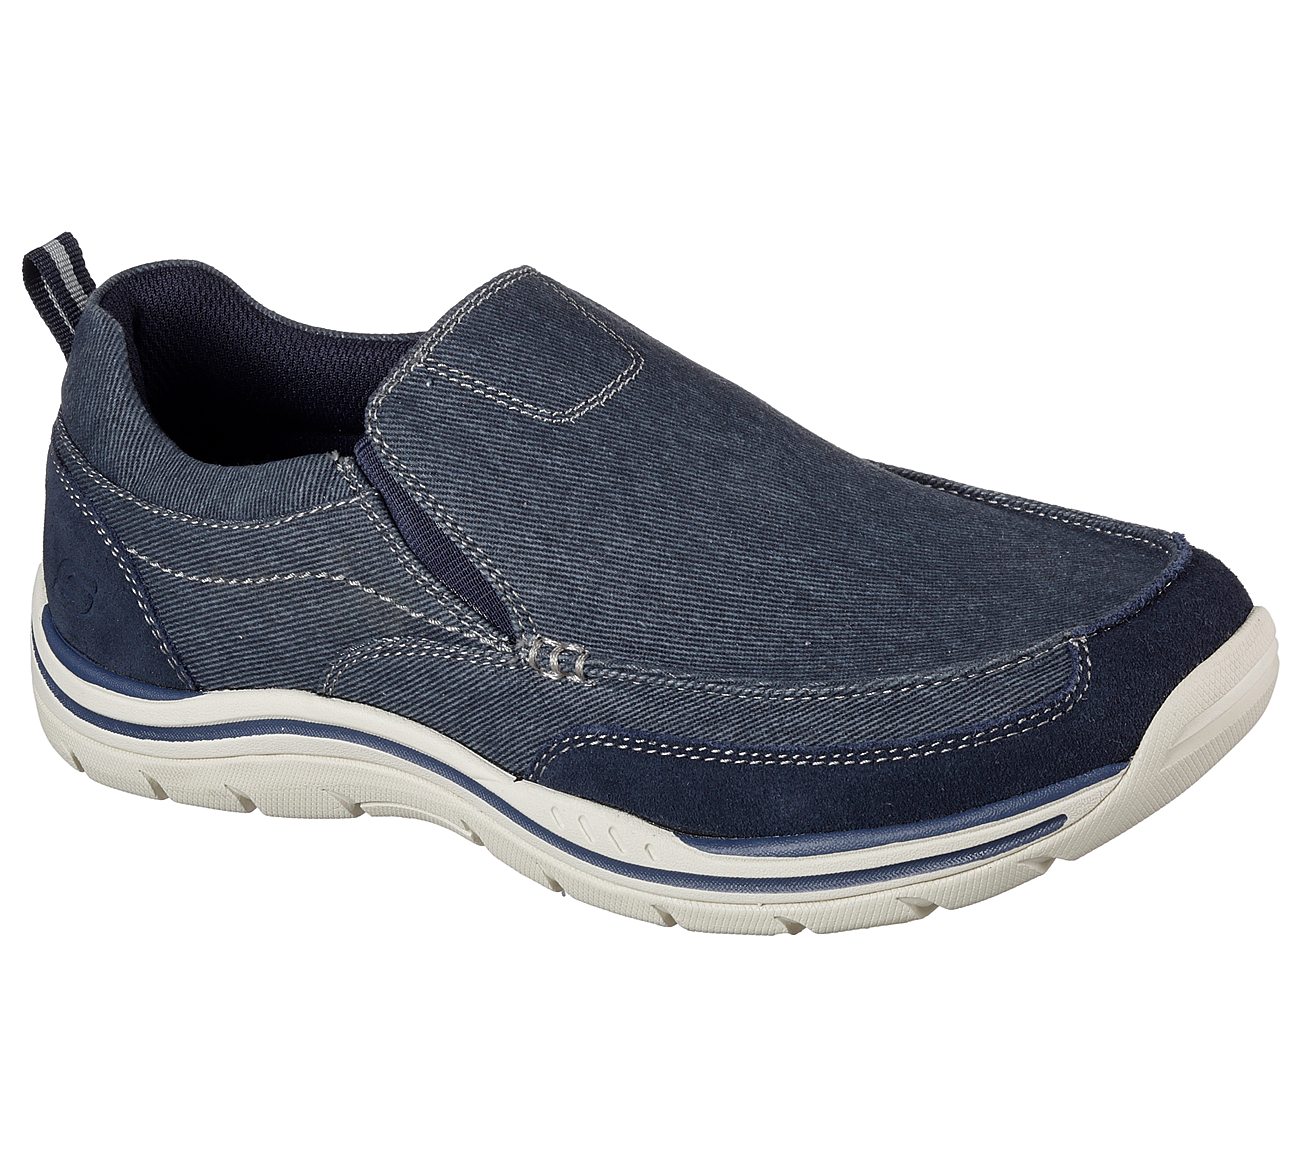 Buy SKECHERS Relaxed Fit: Expected - Tomen SKECHERS Relaxed Fit Shoes